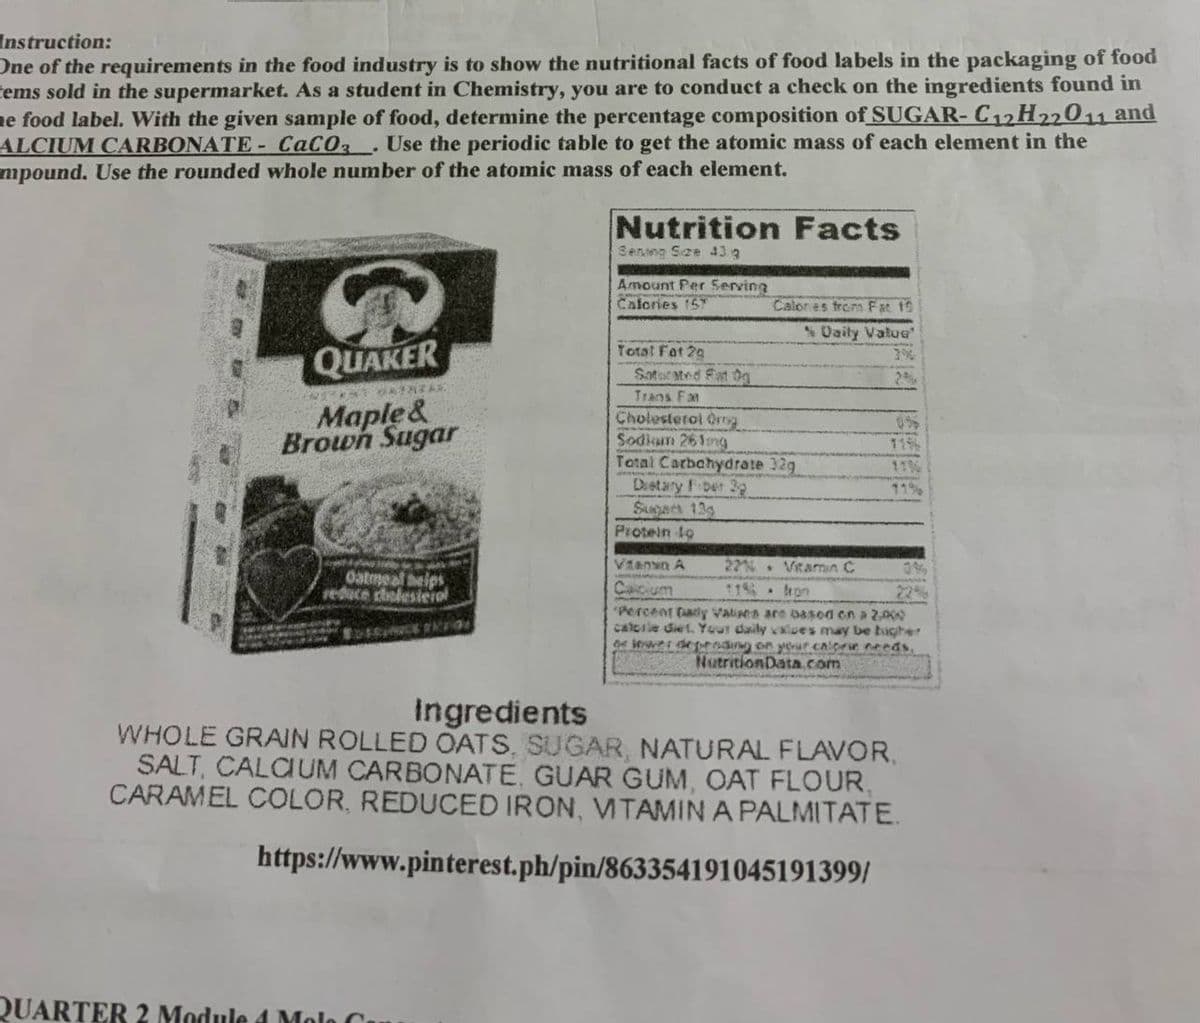 Instruction:
One of the requirements in the food industry is to show the nutritional facts of food labels in the packaging of food
tems sold in the supermarket. As a student in Chemistry, you are to conduct a check on the ingredients found in
ne food label. With the given sample of food, determine the percentage composition of SUGAR- C12H22011 and
ALCIUM CARBONATE- CaCO .Use the periodic table to get the atomic mass of each element in the
mpound. Use the rounded whole number of the atomic mass of each element.
Nutrition Facts
Senmg See 43 9
Amount Per Serving
Calories 157
Calones from Fat 19
% Uaily Vatue
QUAKER
Total Fat 29
Sator ated Fat 0g
Trans Fan
Maple&
Brown Sugar
Cholesterol Og
Sodkum 261mg
Total Carbchydrate 32g
Destary Fber 2
Supars 13g
Protein to
115
11
22% Vtamin C
11 . hon
Viann A
0%
Oatmeal beips
reduce cholesteiol
Caicium
"Percent fady Valises are 0asod en a 2
calcile diet. Your daily valves may be bigher
De Wwer deprdin on your CArr needs,
22%
NutritionData.com
Ingredients
WHOLE GRAN ROLLED OATS, SUGAR, NATURAL FLAVOR,
SALT, CALCIUM CARBONATE, GUAR GUM, OAT FLOUR,
CARAMEL COLOR, REDUCED IRON, VTAMIN A PALMITATE.
https://www.pinterest.ph/pin/863354191045191399/
QUARTER 2 Module d Molo C
